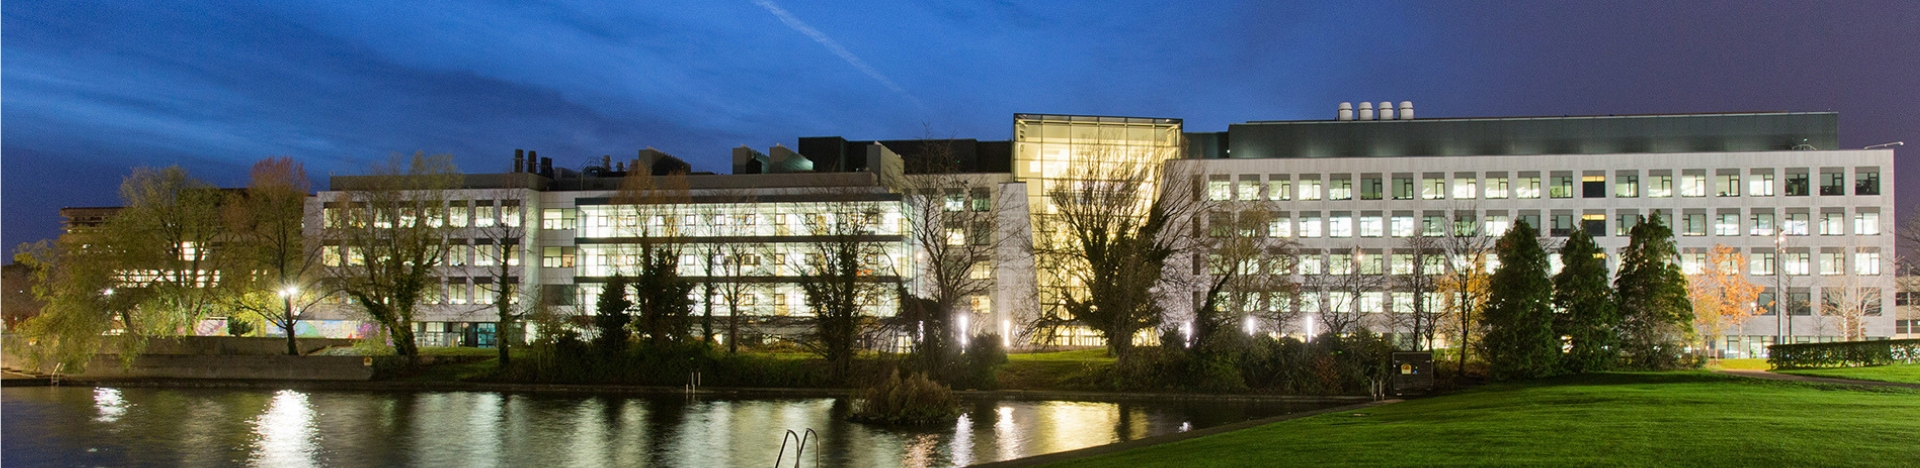 The UCD O'Brien Centre for Science in the evening